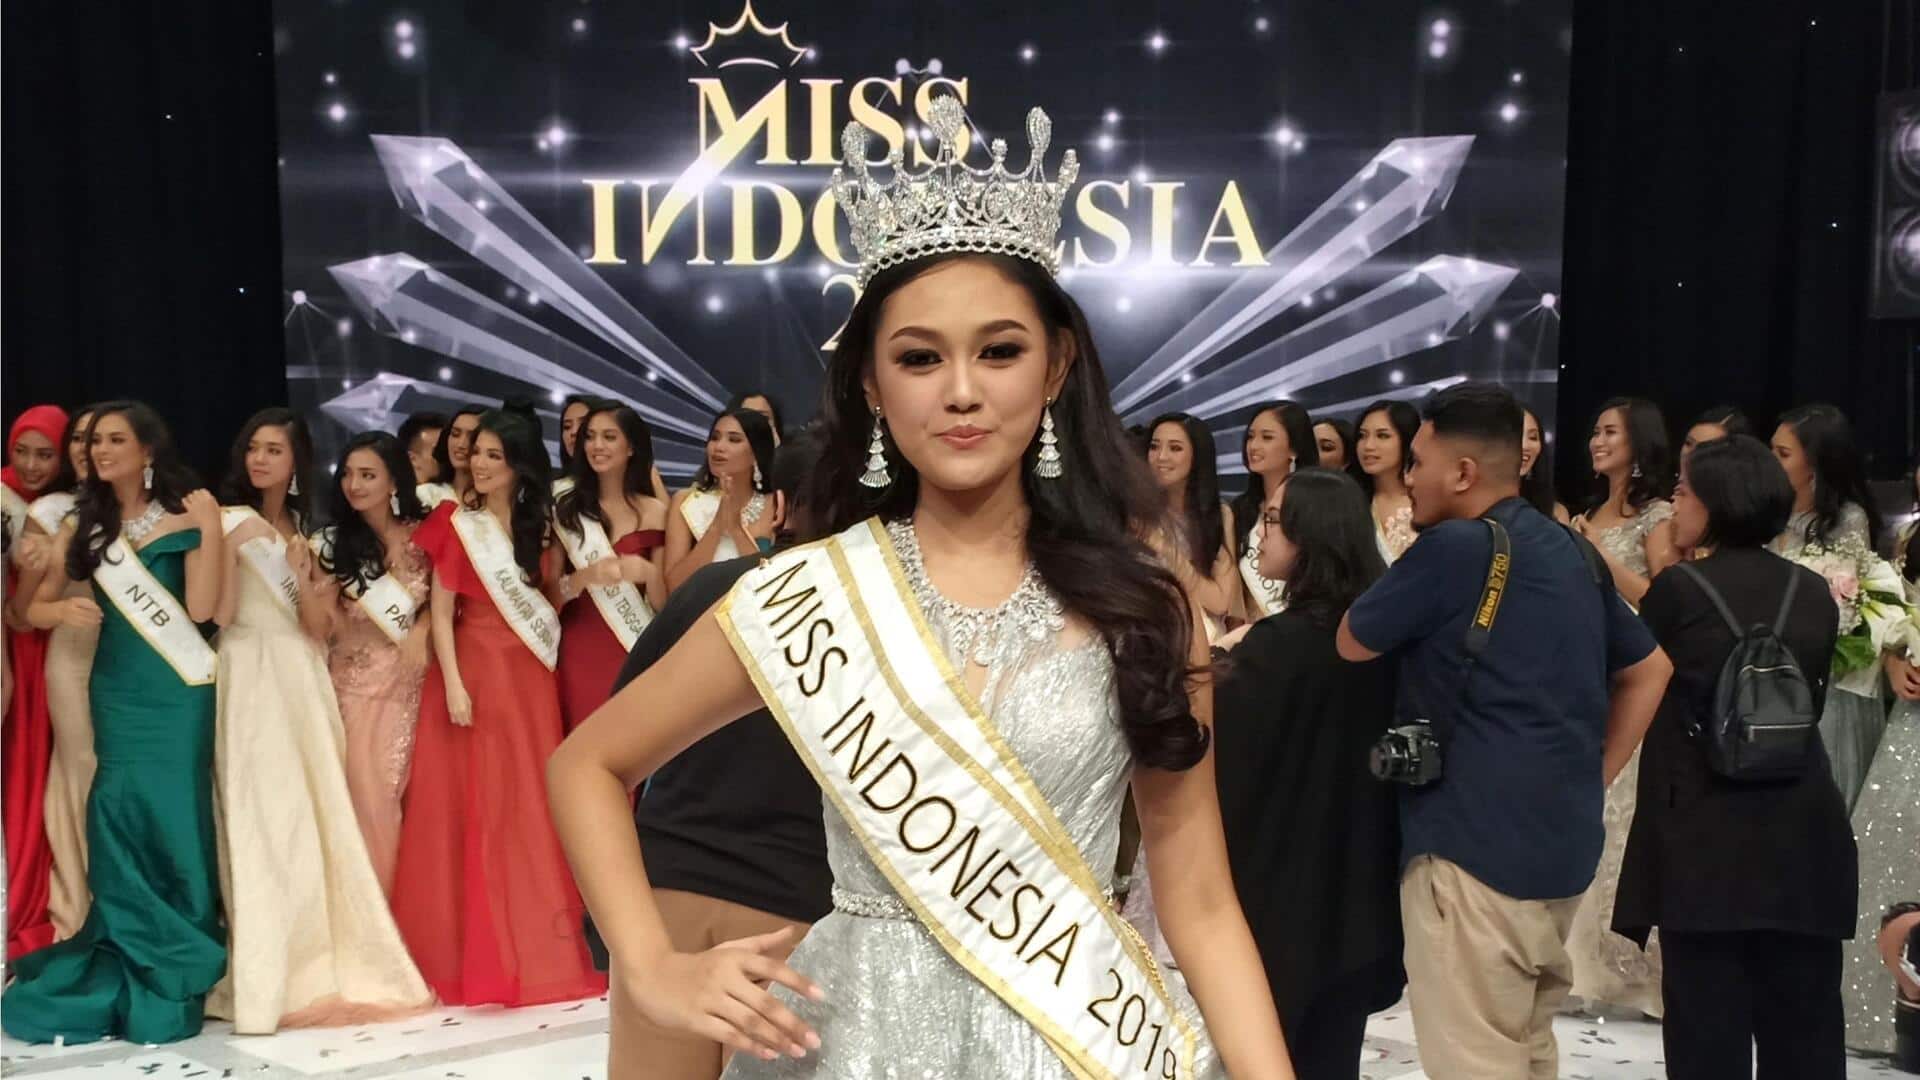 'Topless body checks' allegations: What's controversy surrounding Miss Universe Indonesia 